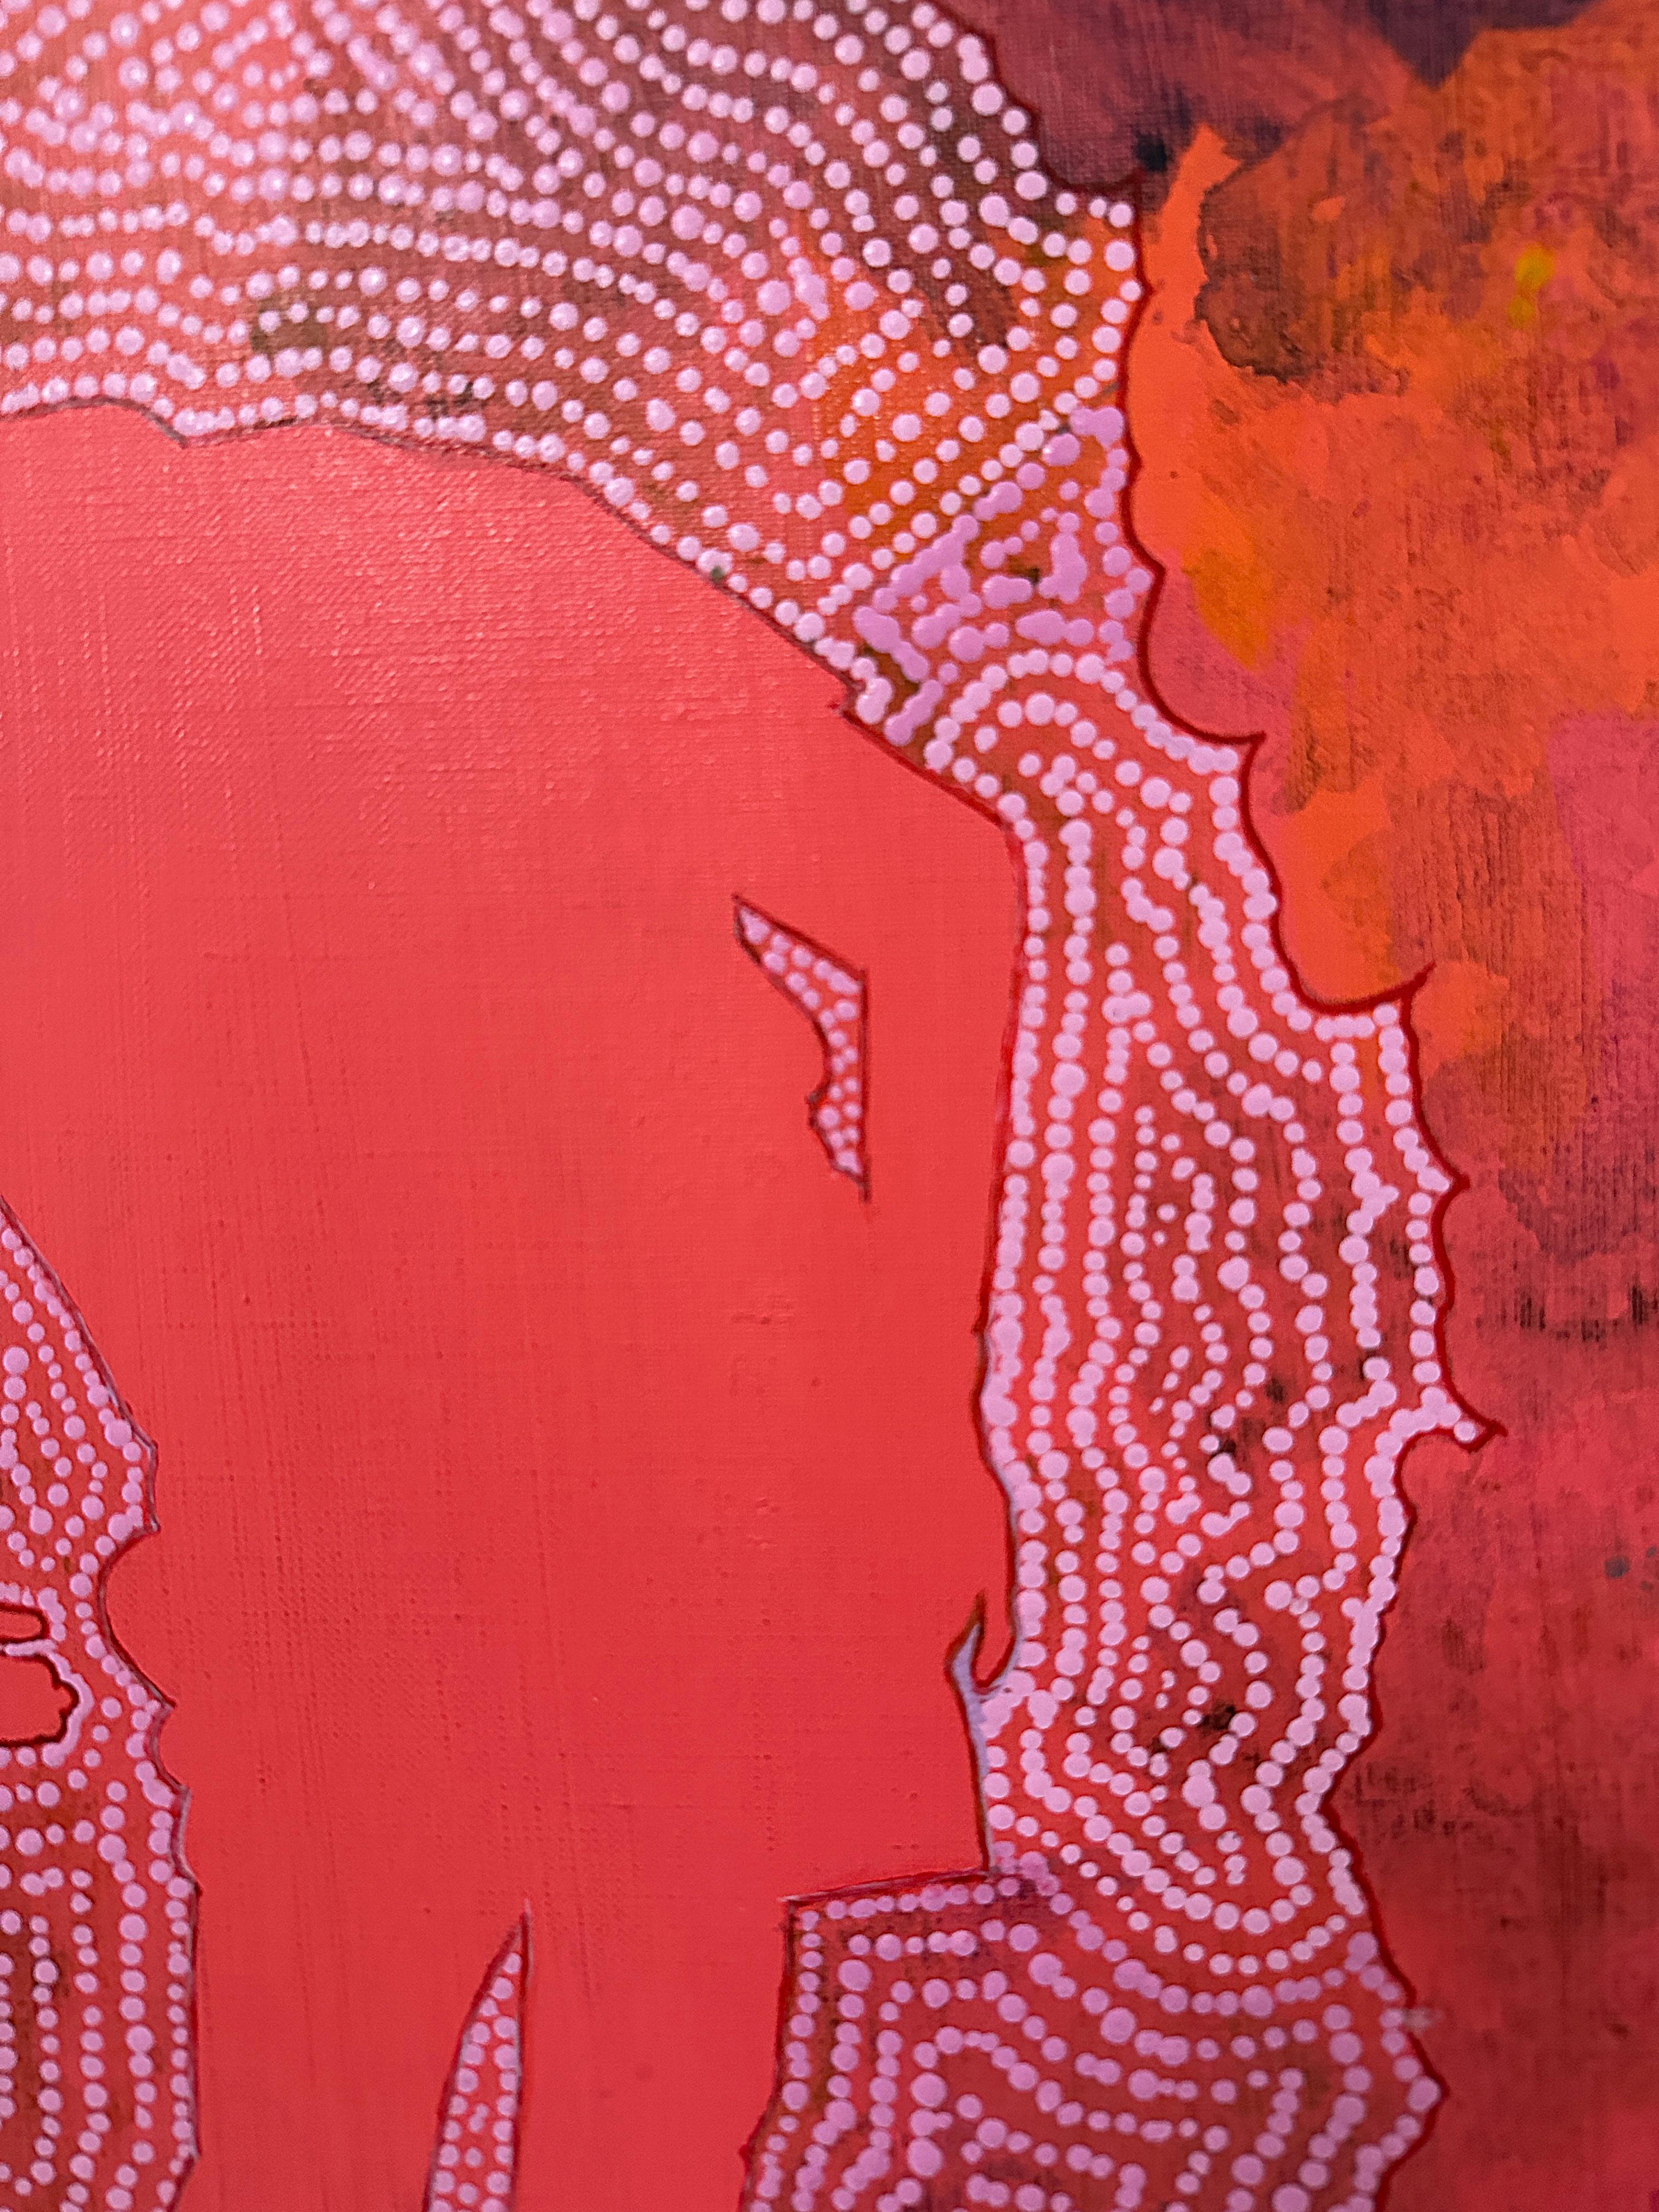 S-FIRST, red, figurative, patterned, abstract - Contemporary Painting by Barbara Strasen